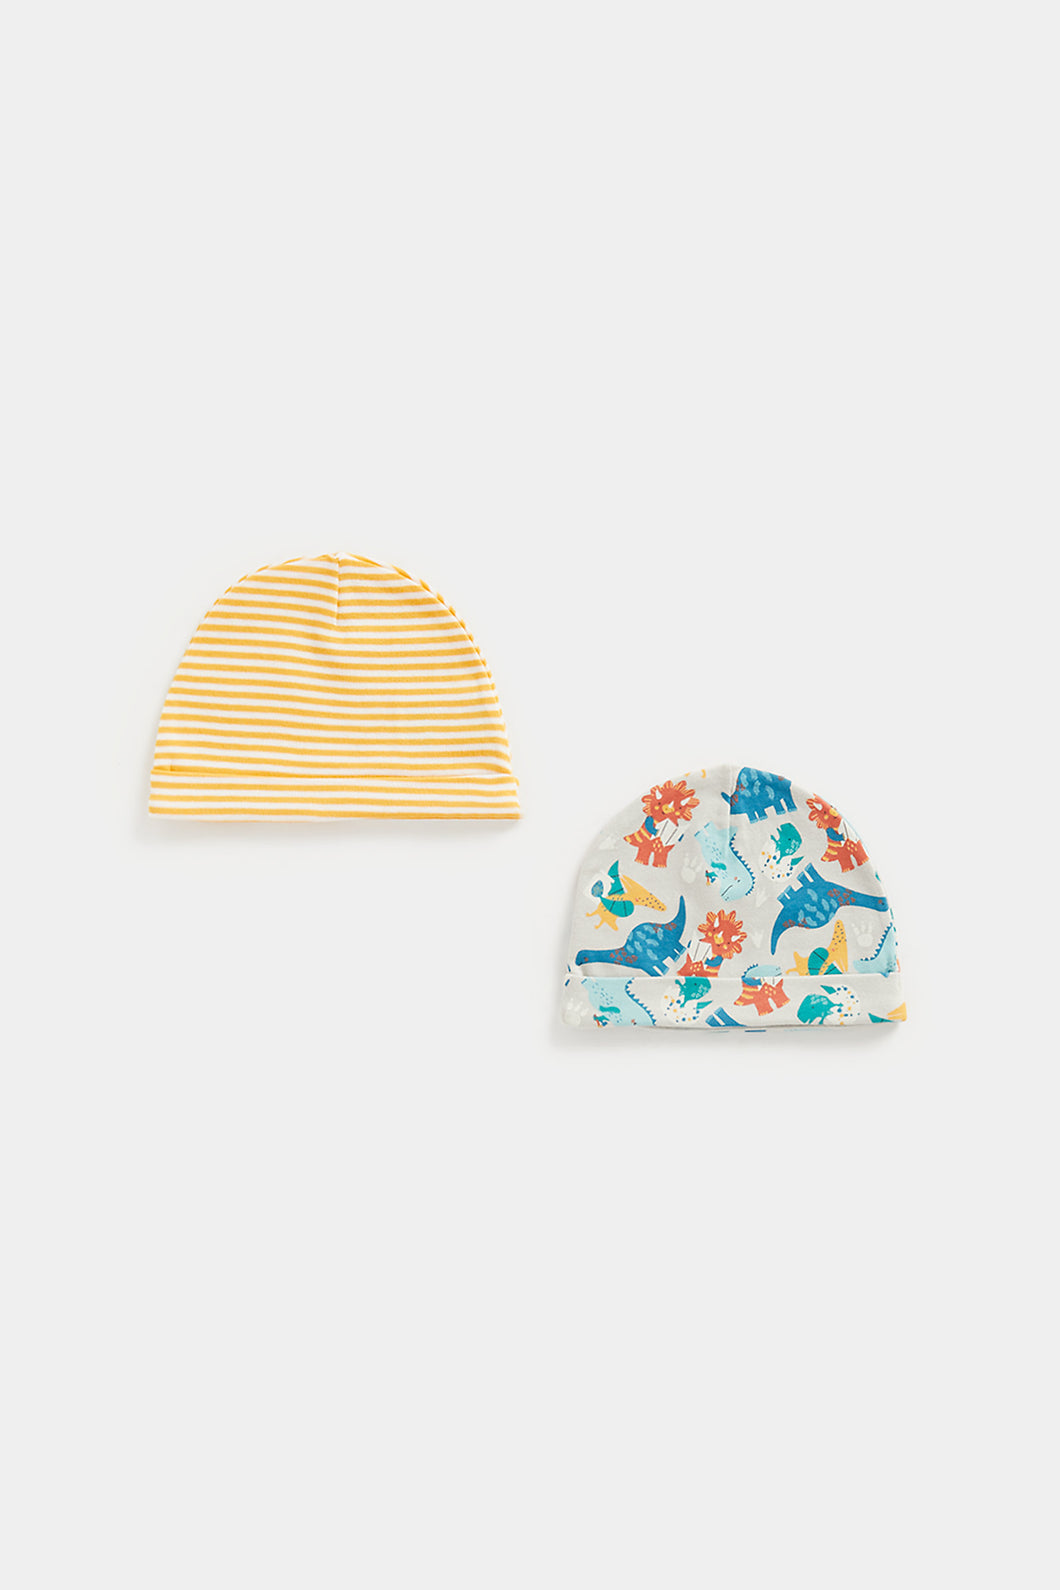 Mothercare Dinosaur Baby Hats - 2 Pack